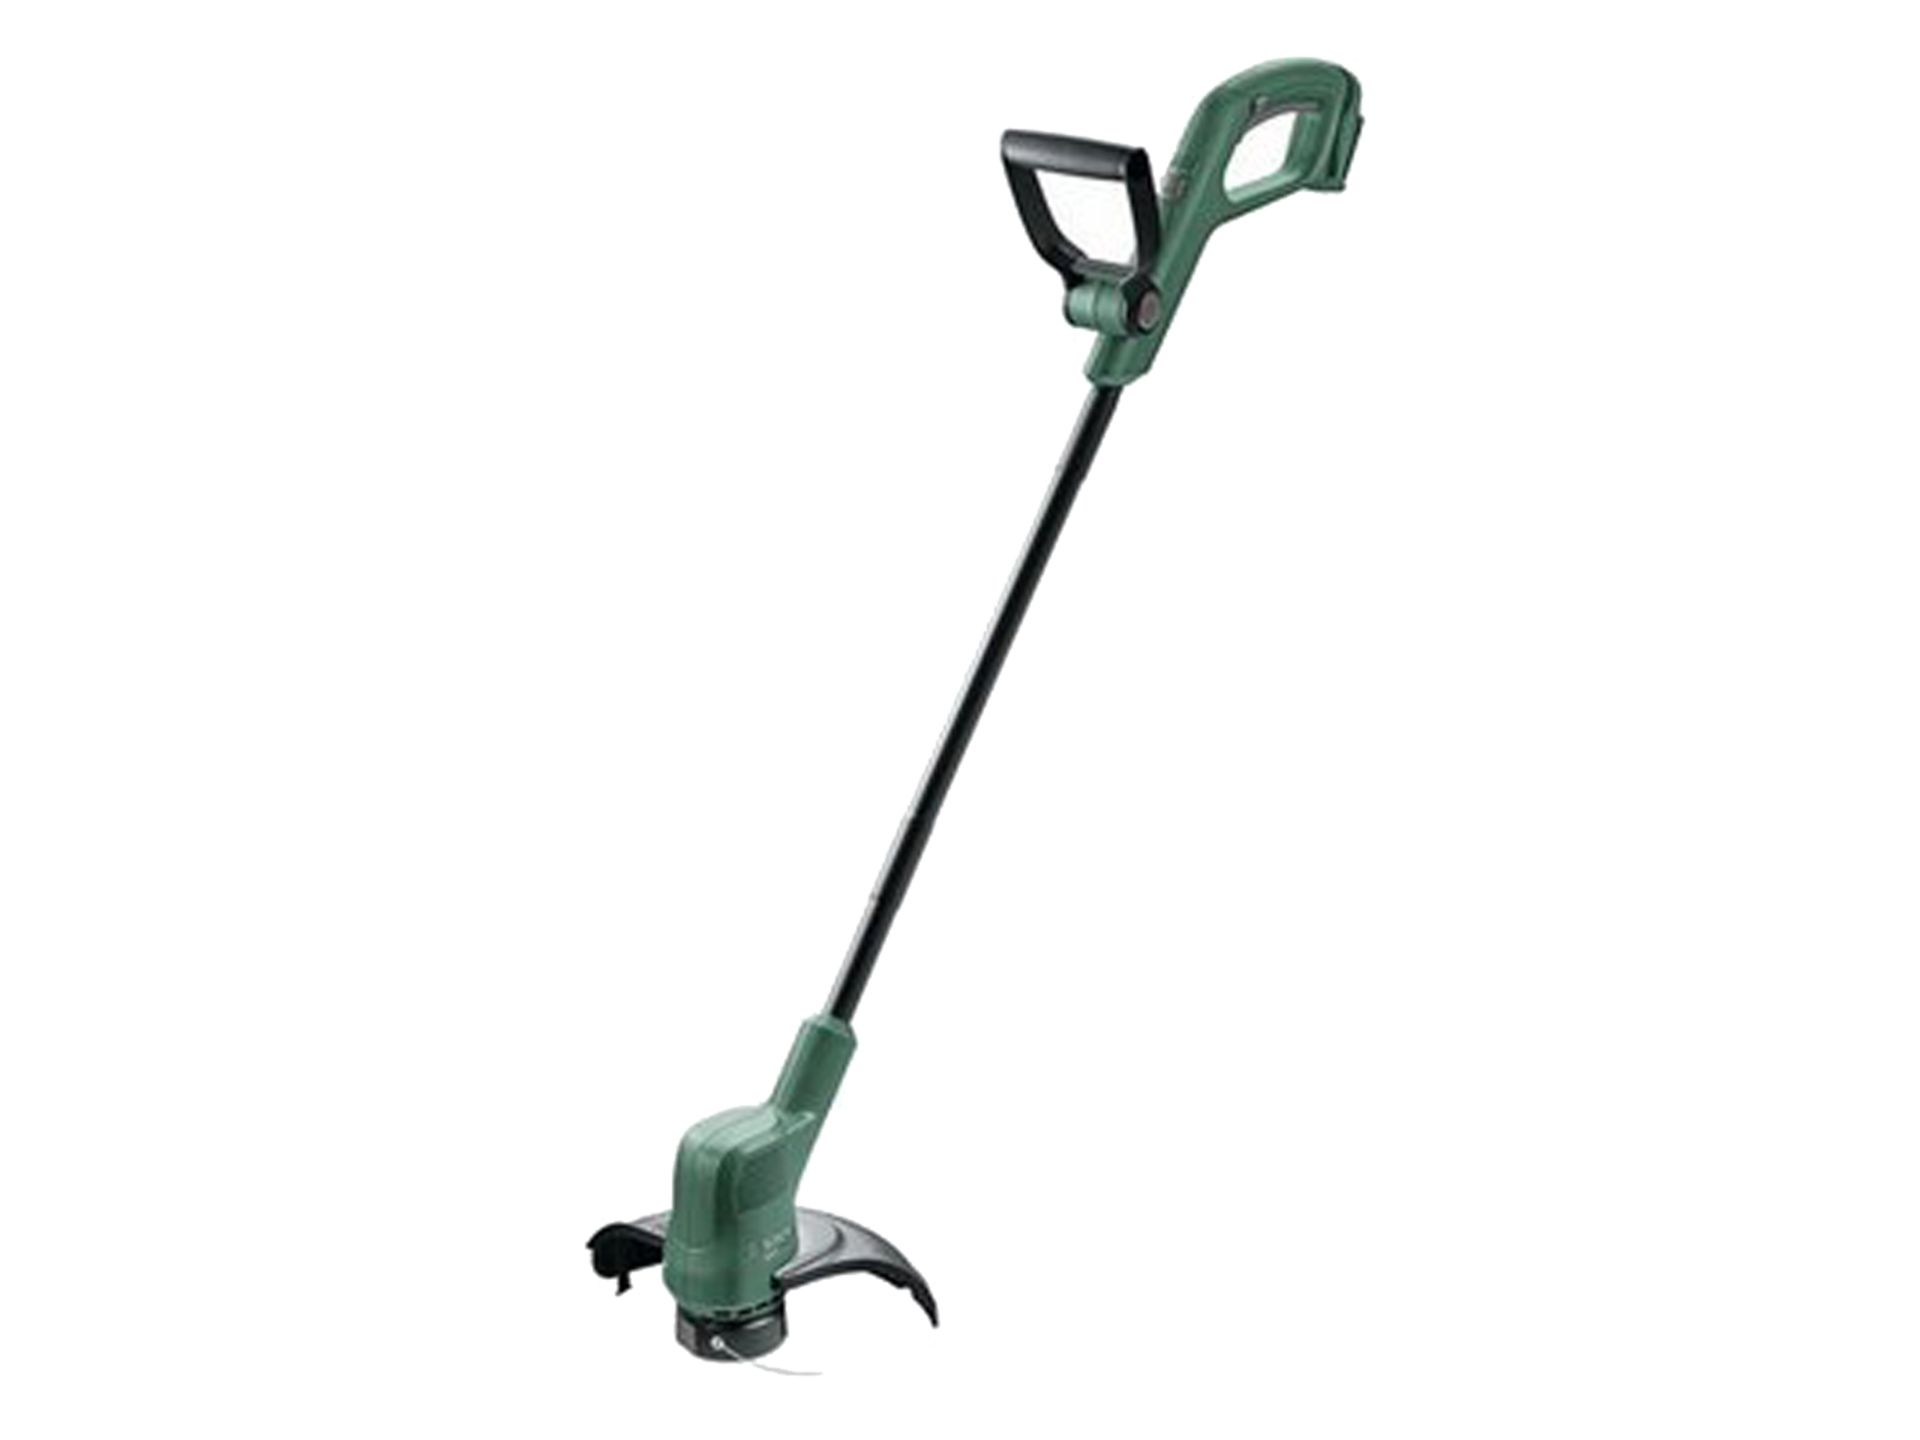 UNBOXED BOSCH EASY GRASS CUT 18 BARETOOLCondition ReportAppraisal Available on Request- All Items